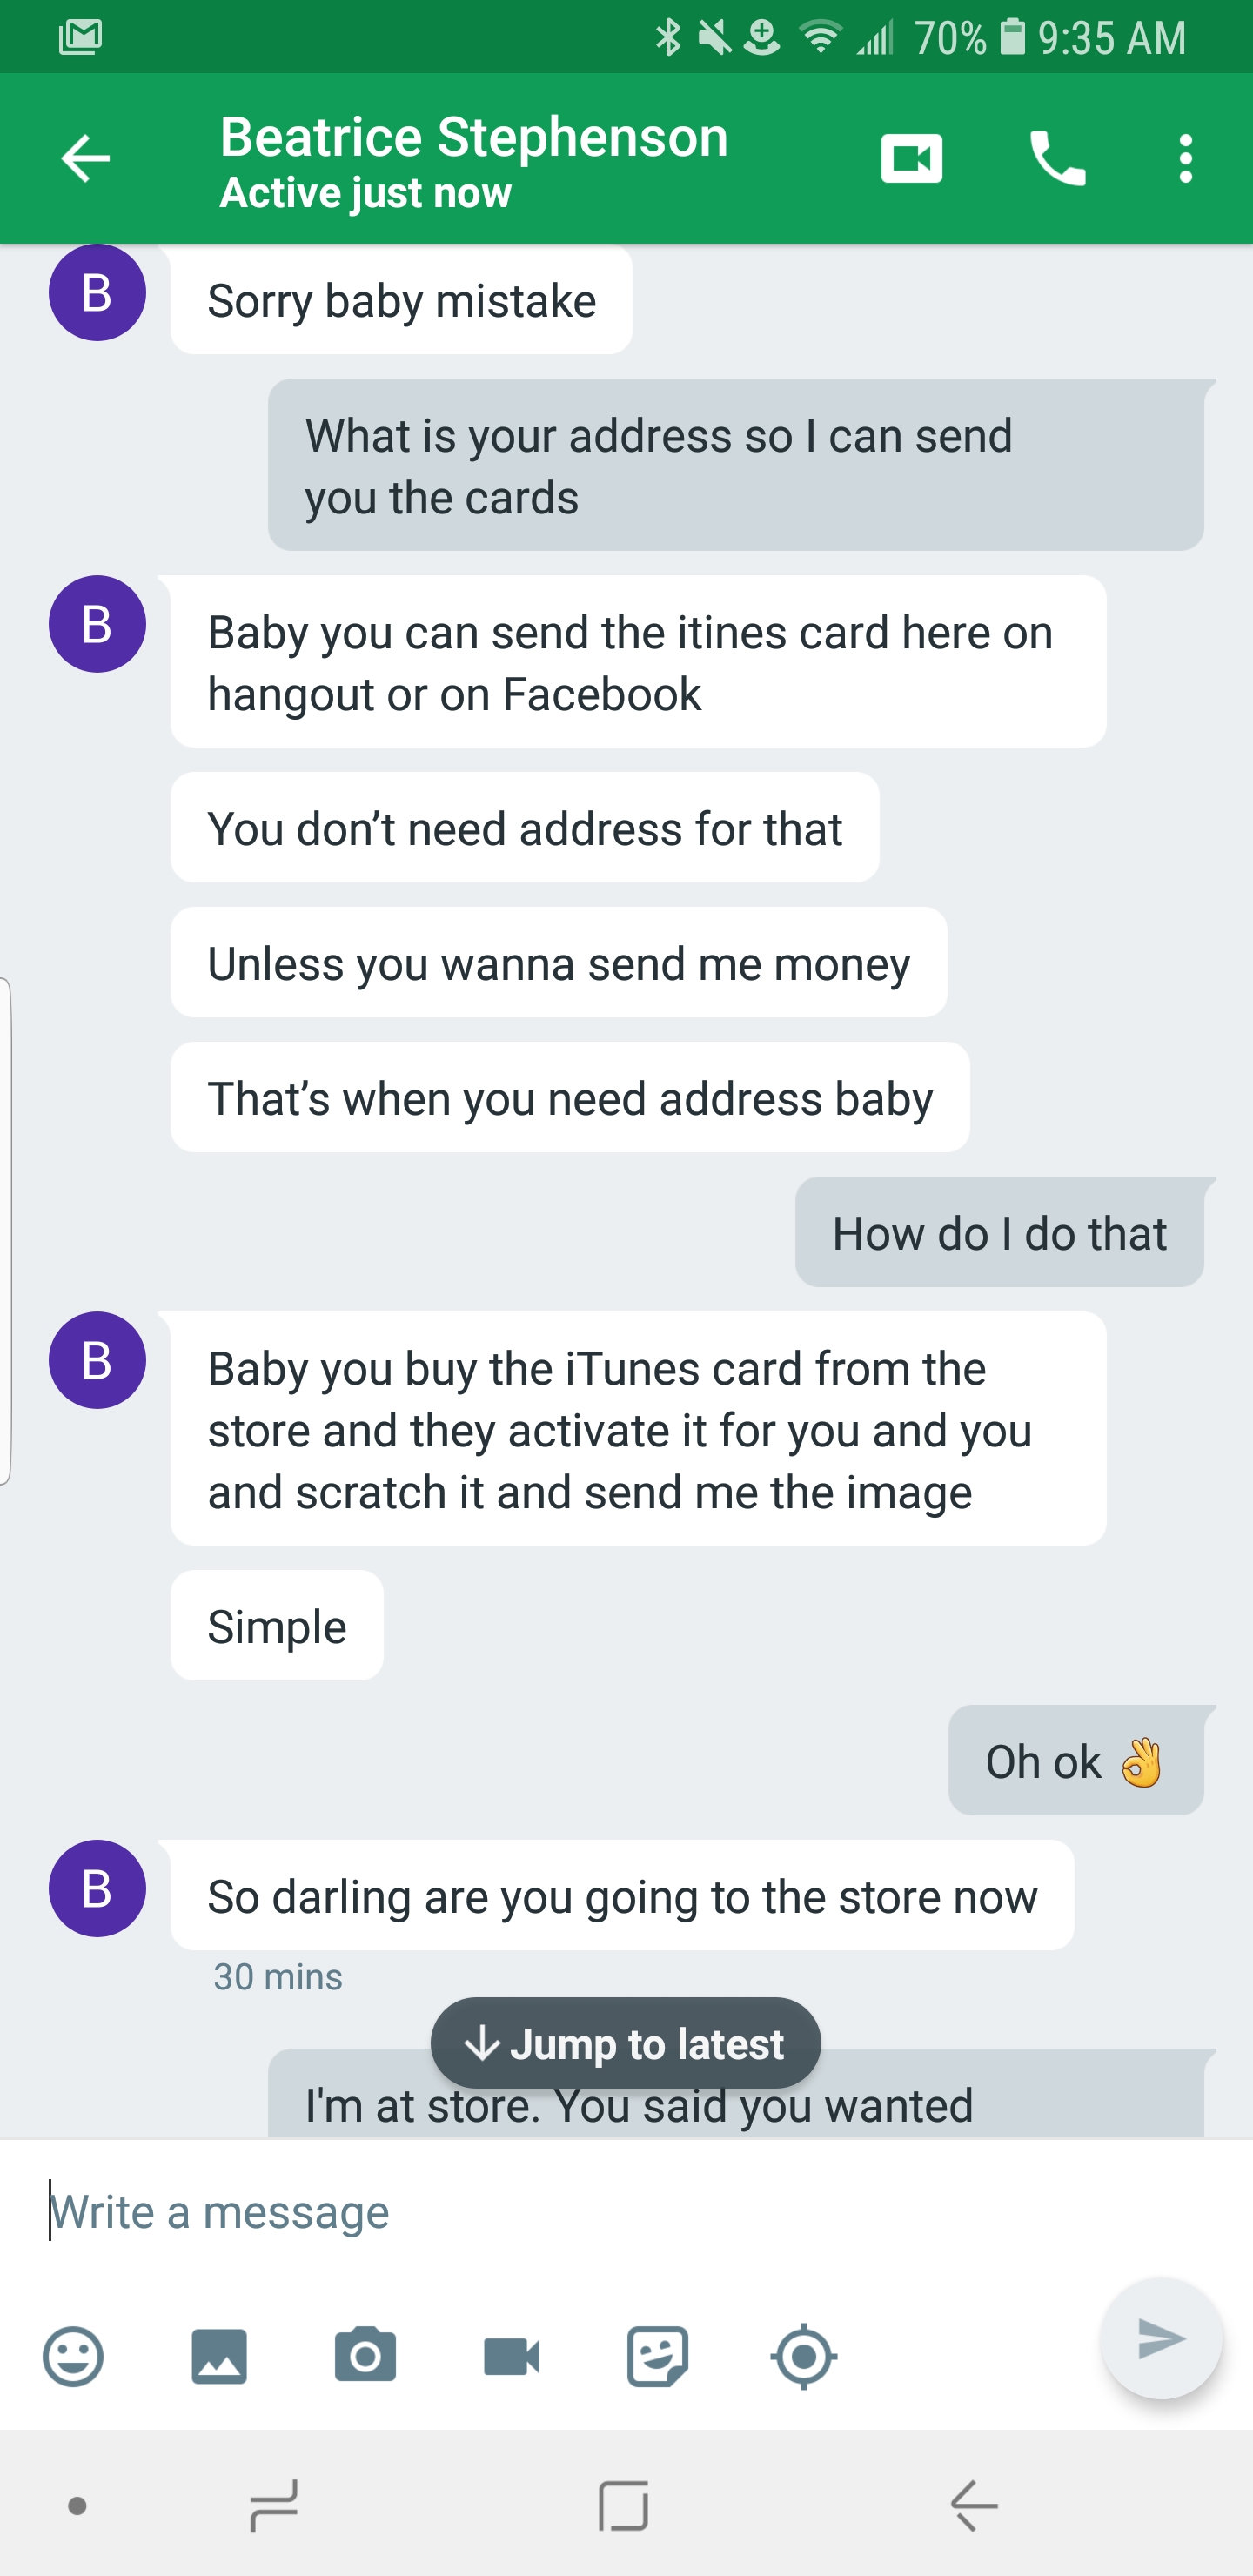 trolling conversation - 4 9 Beatrice Stephenson Active just now 702 ! Sorry baby mistake What is your address so I can send you the cards Baby you can send the itines card here on hangout or on Facebook You don't need address for that Unless you wanna sen